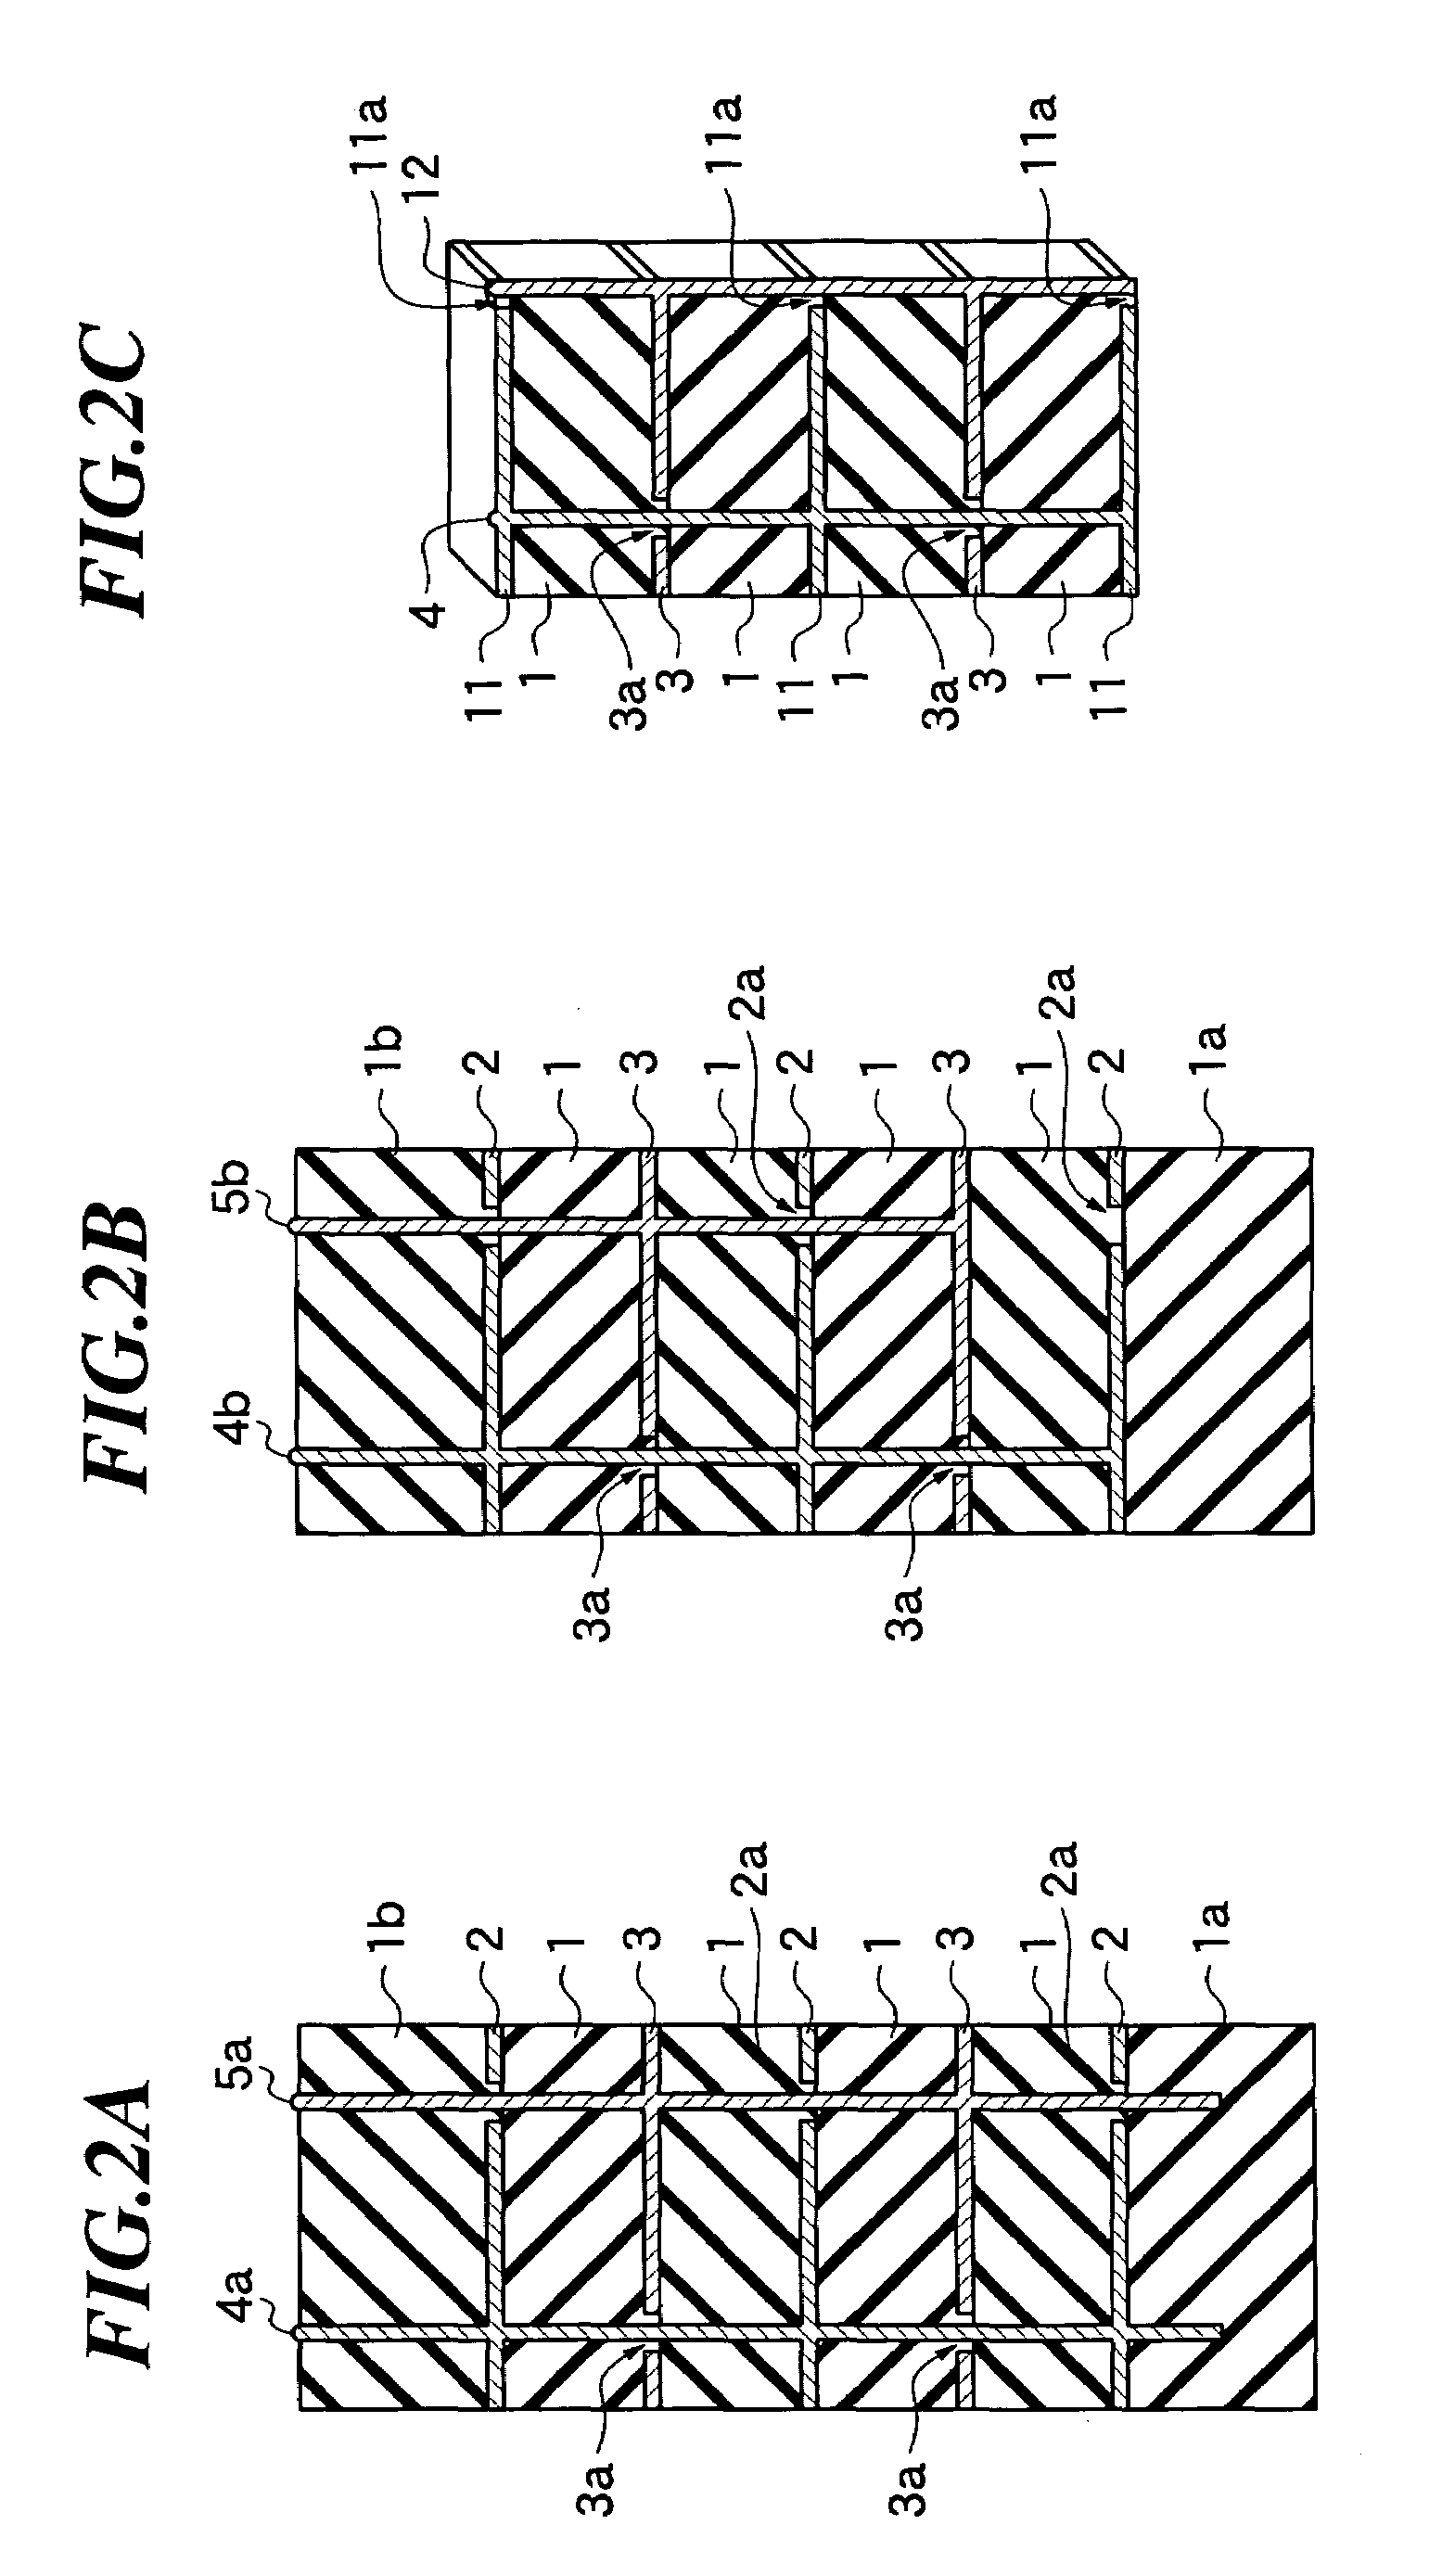 Laminated structure and method of manufacturing the same